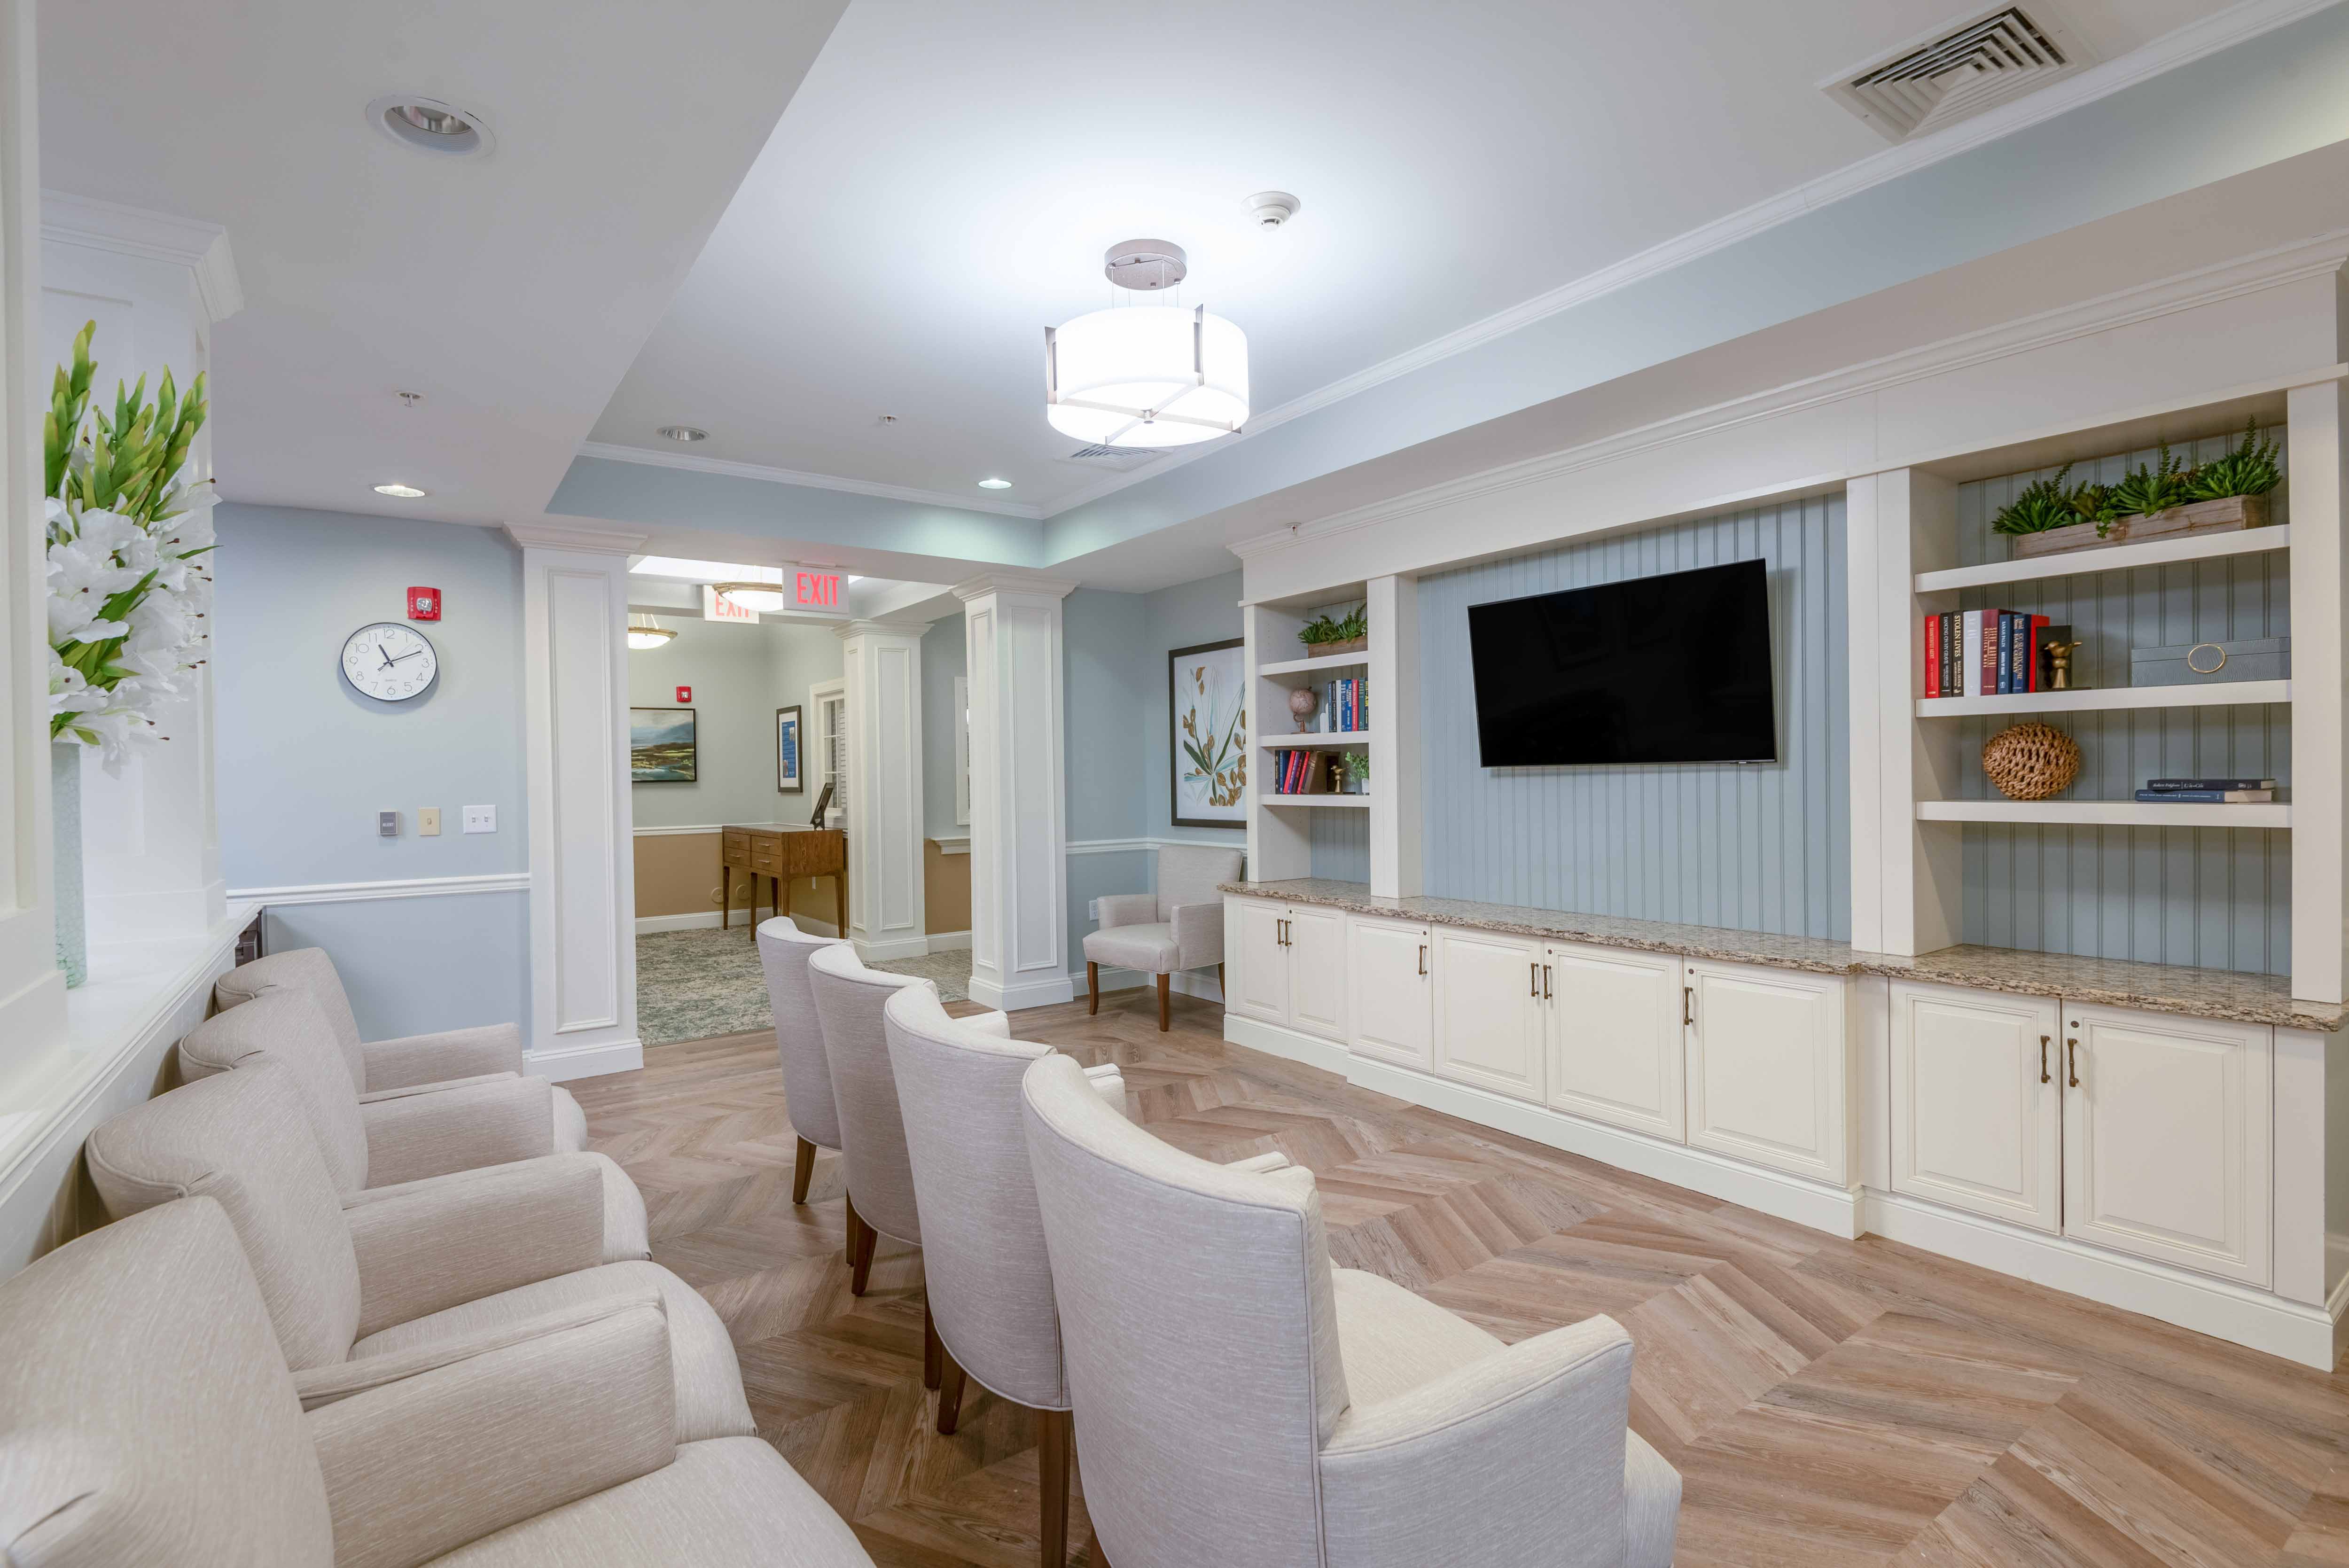 Brightview South River - Edgewater Assisted Living and Memory Care